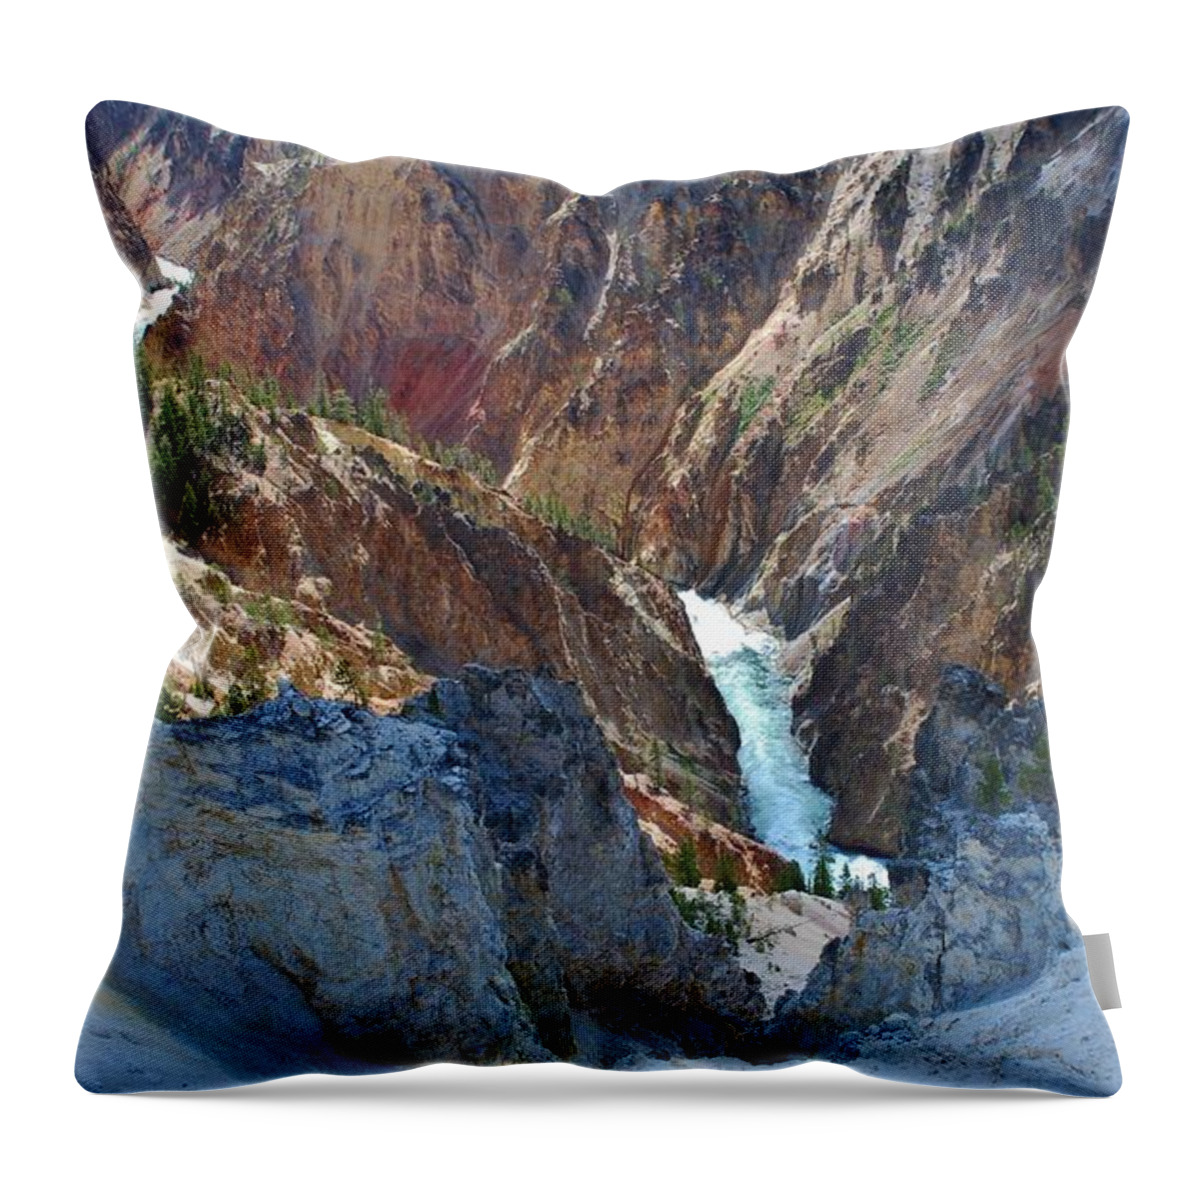 Lower Falls Throw Pillow featuring the photograph Lower Falls - Yellowstone by Dany Lison